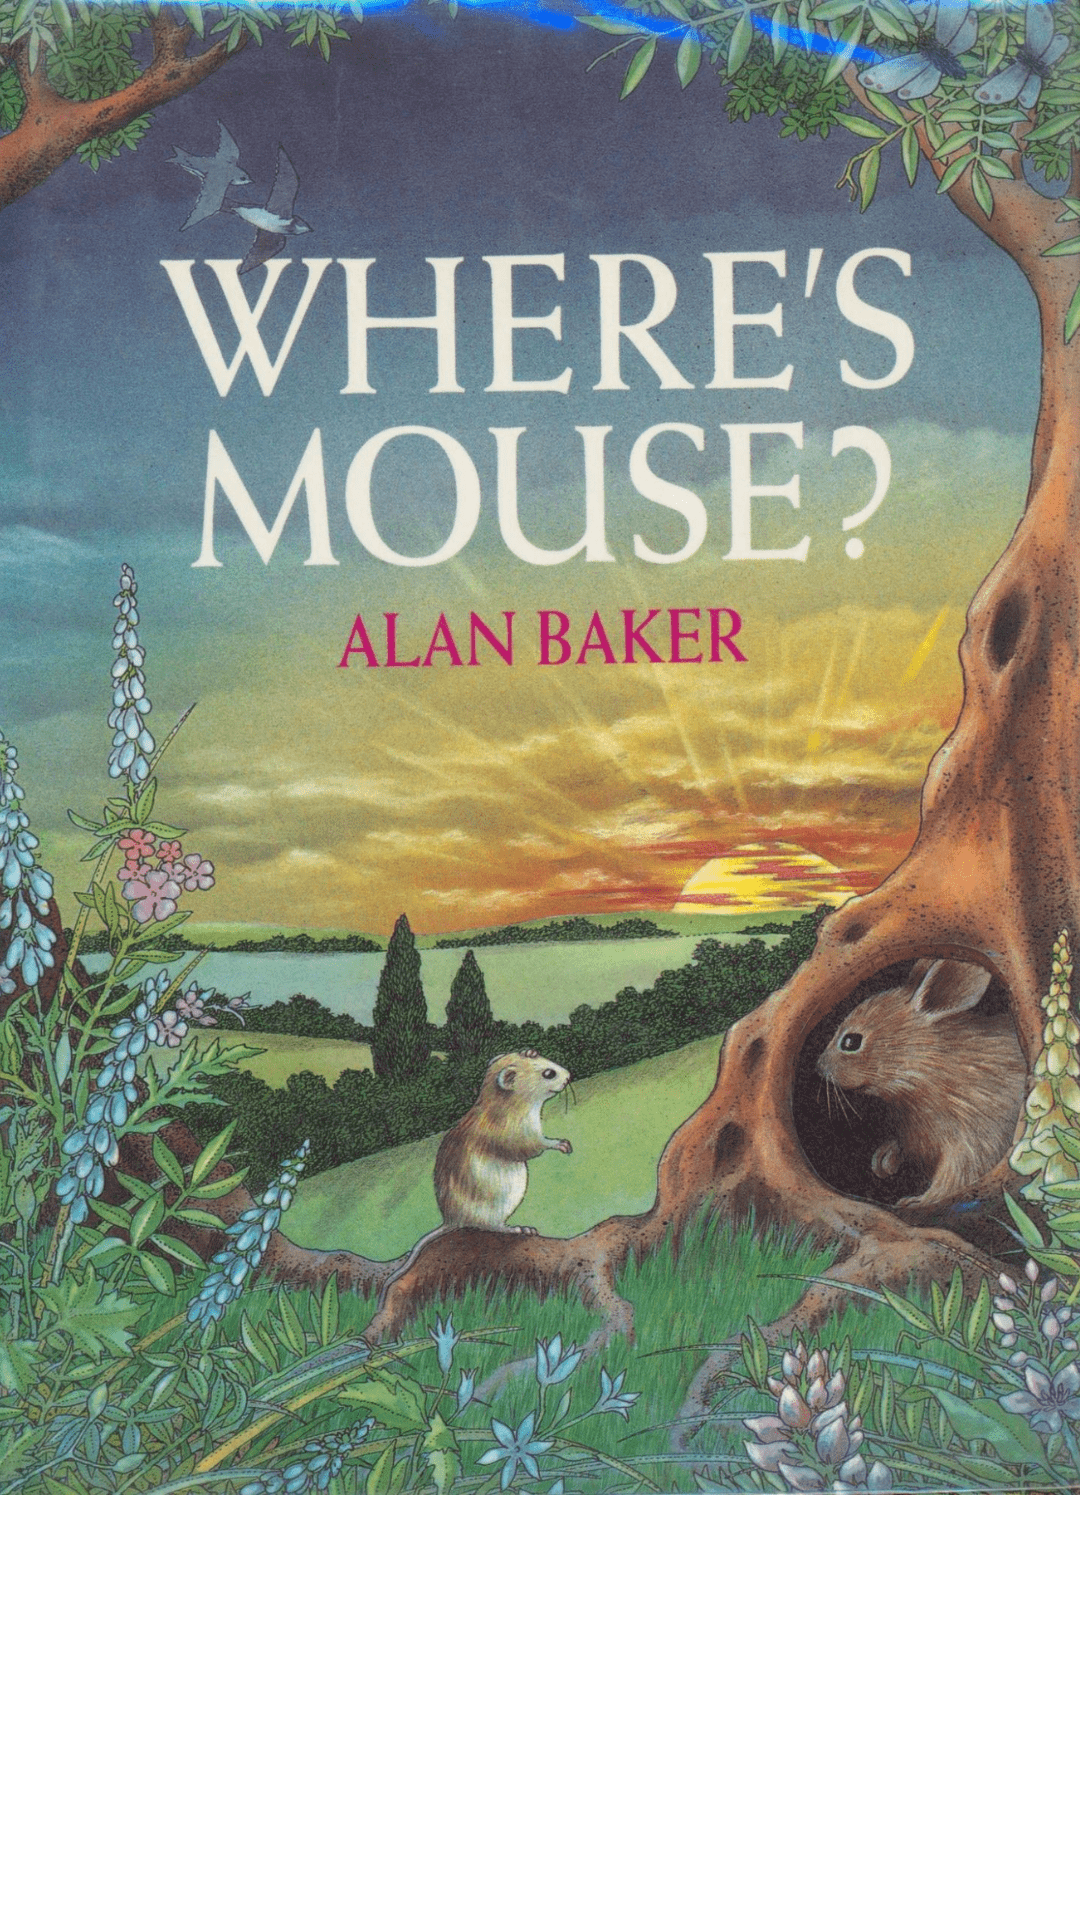 Where's Mouse by Alan Baker